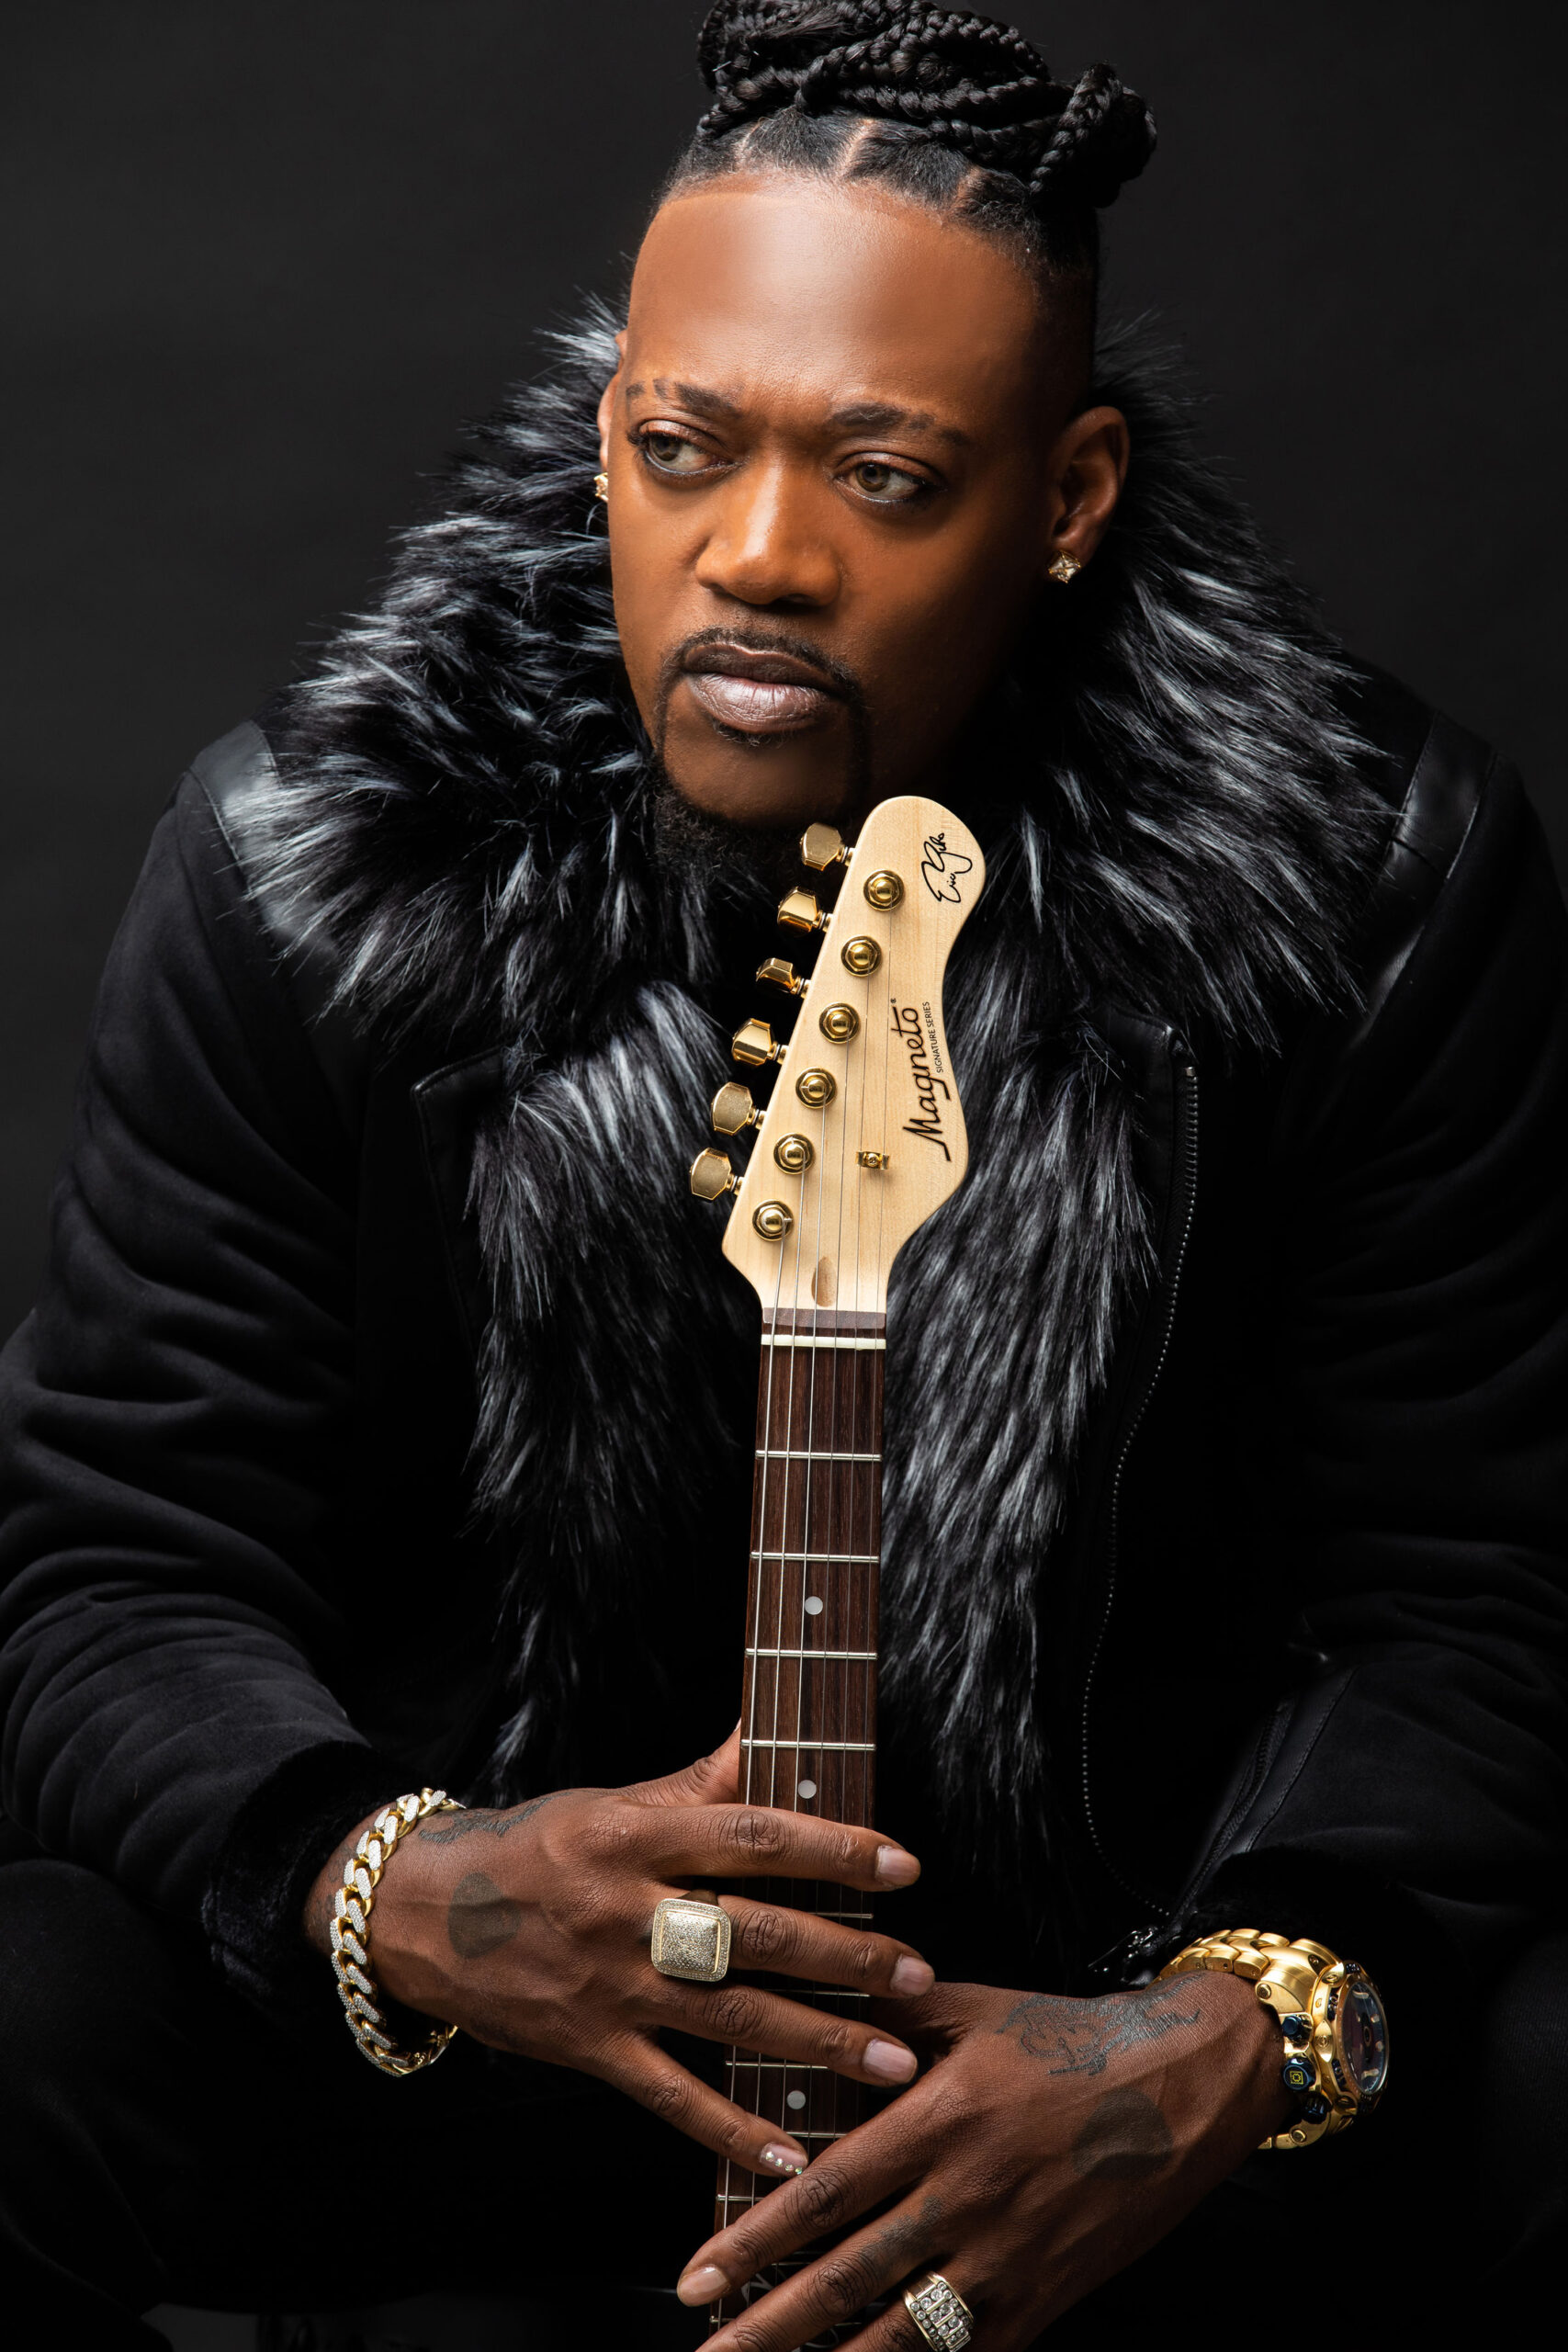 Blues legend Eric Gales comes to Atlanta and reclaims life’s throne